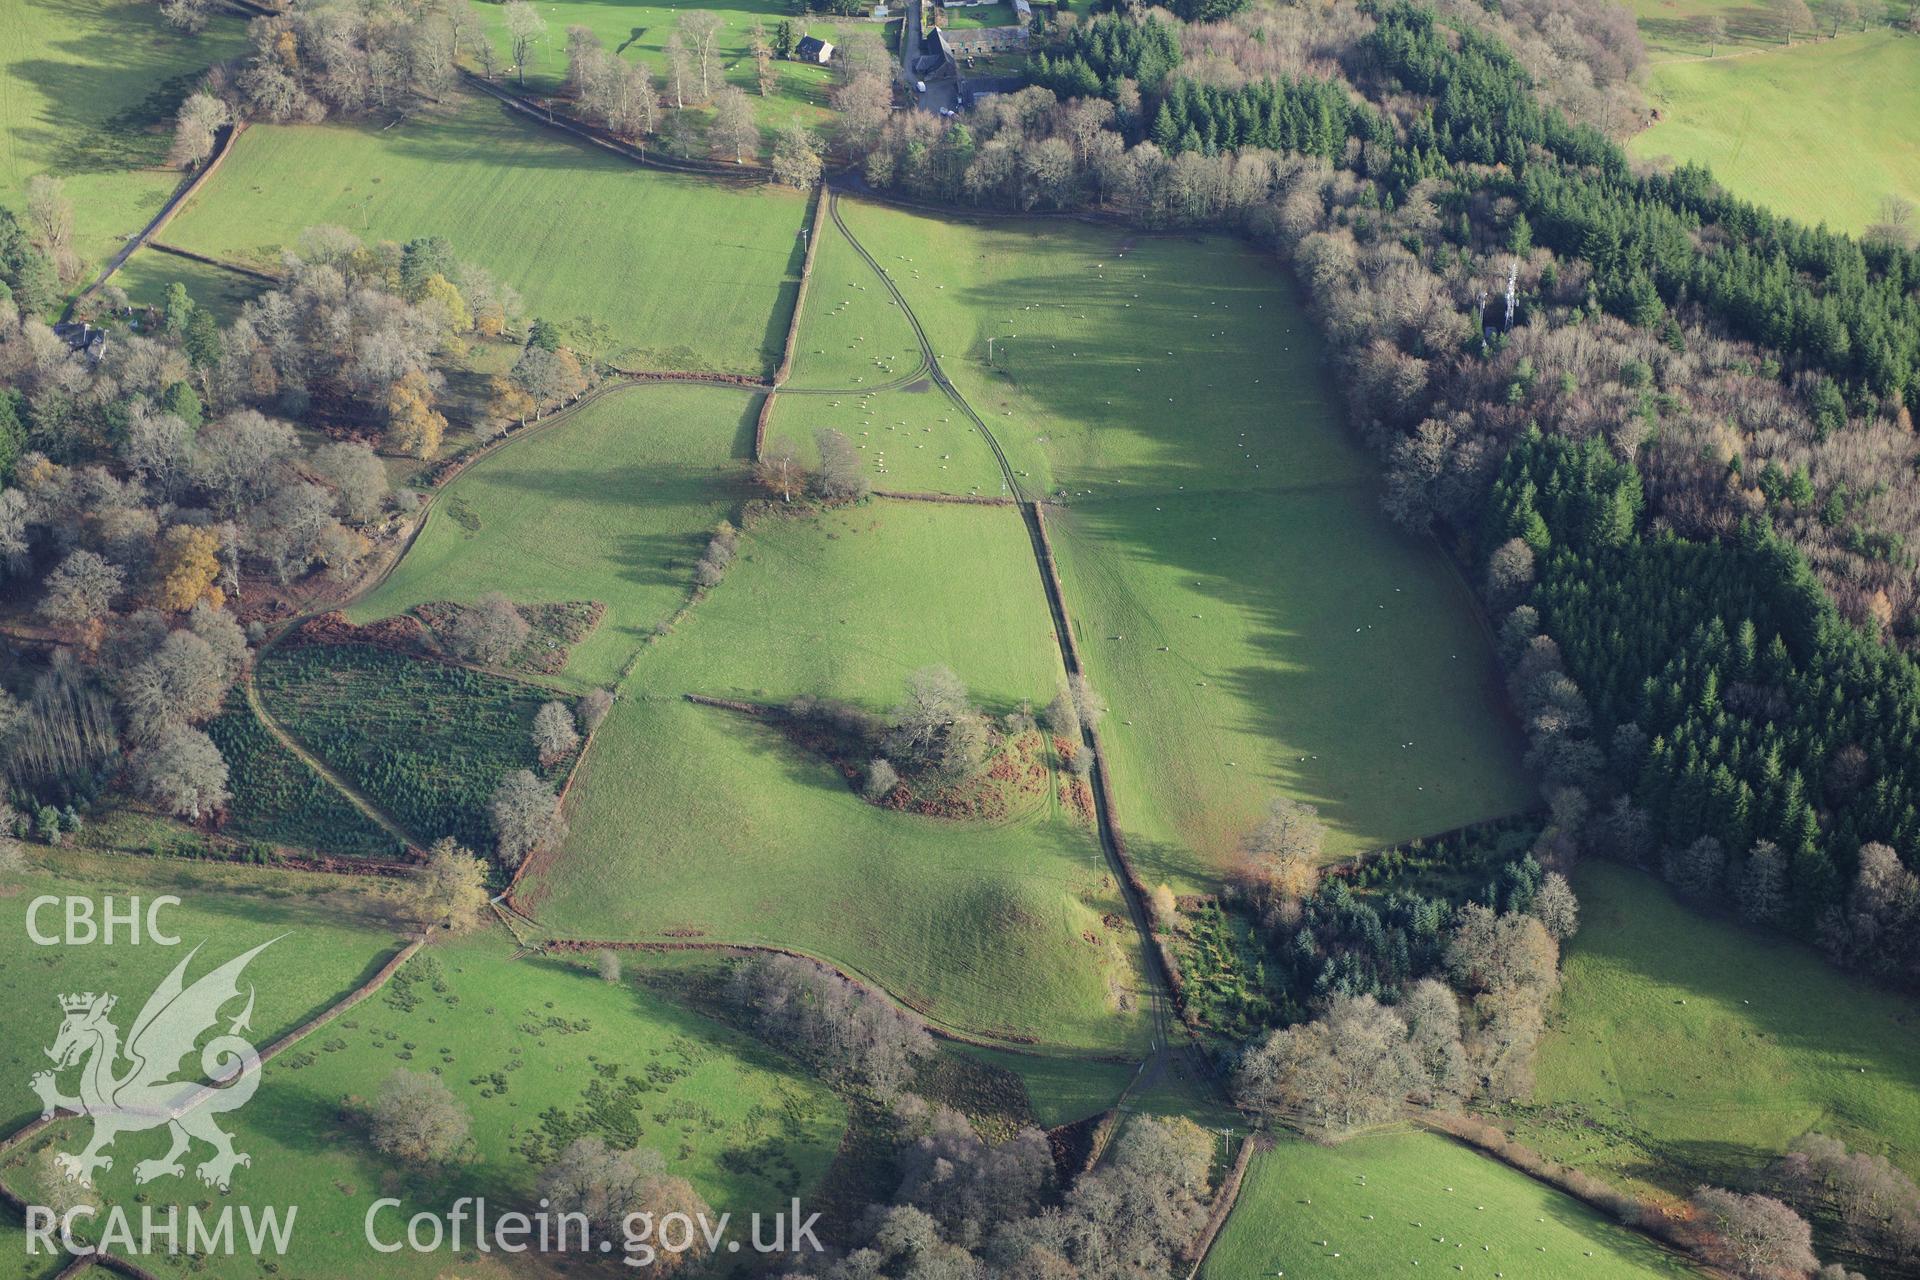 RCAHMW colour oblique photograph of Castell Caemaerdy. Taken by Toby Driver on 23/11/2012.